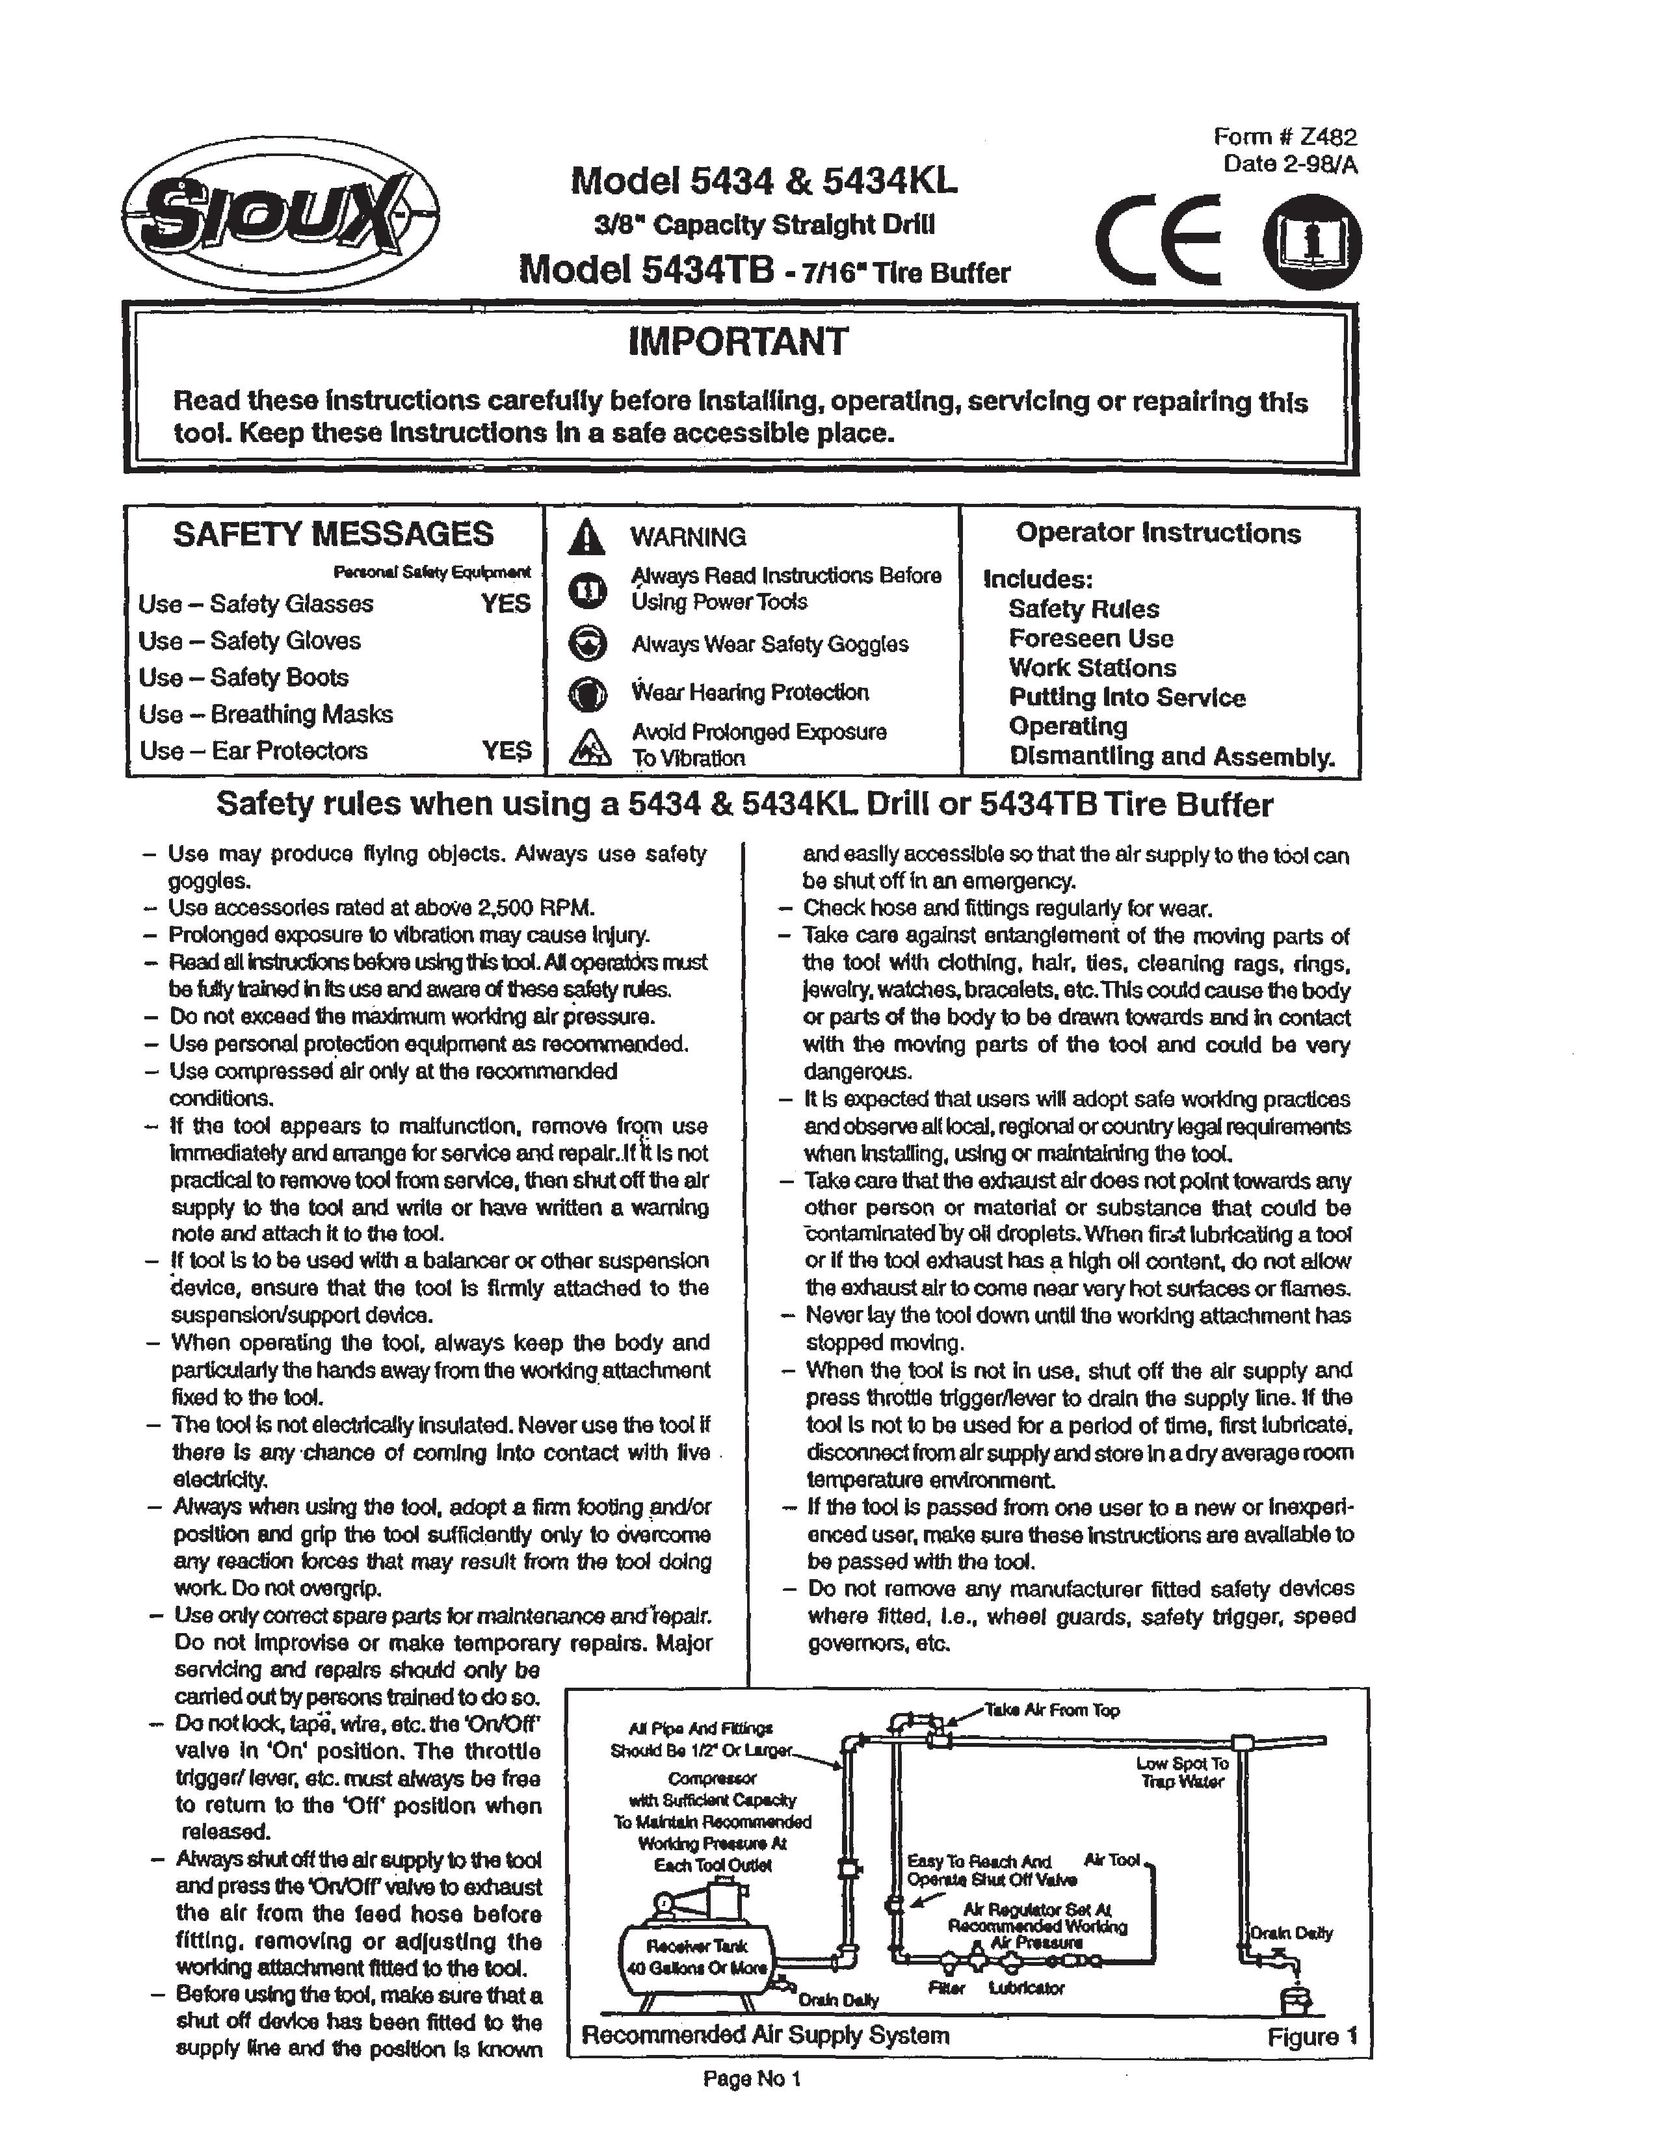 Sioux Tools 5434KL Drill User Manual